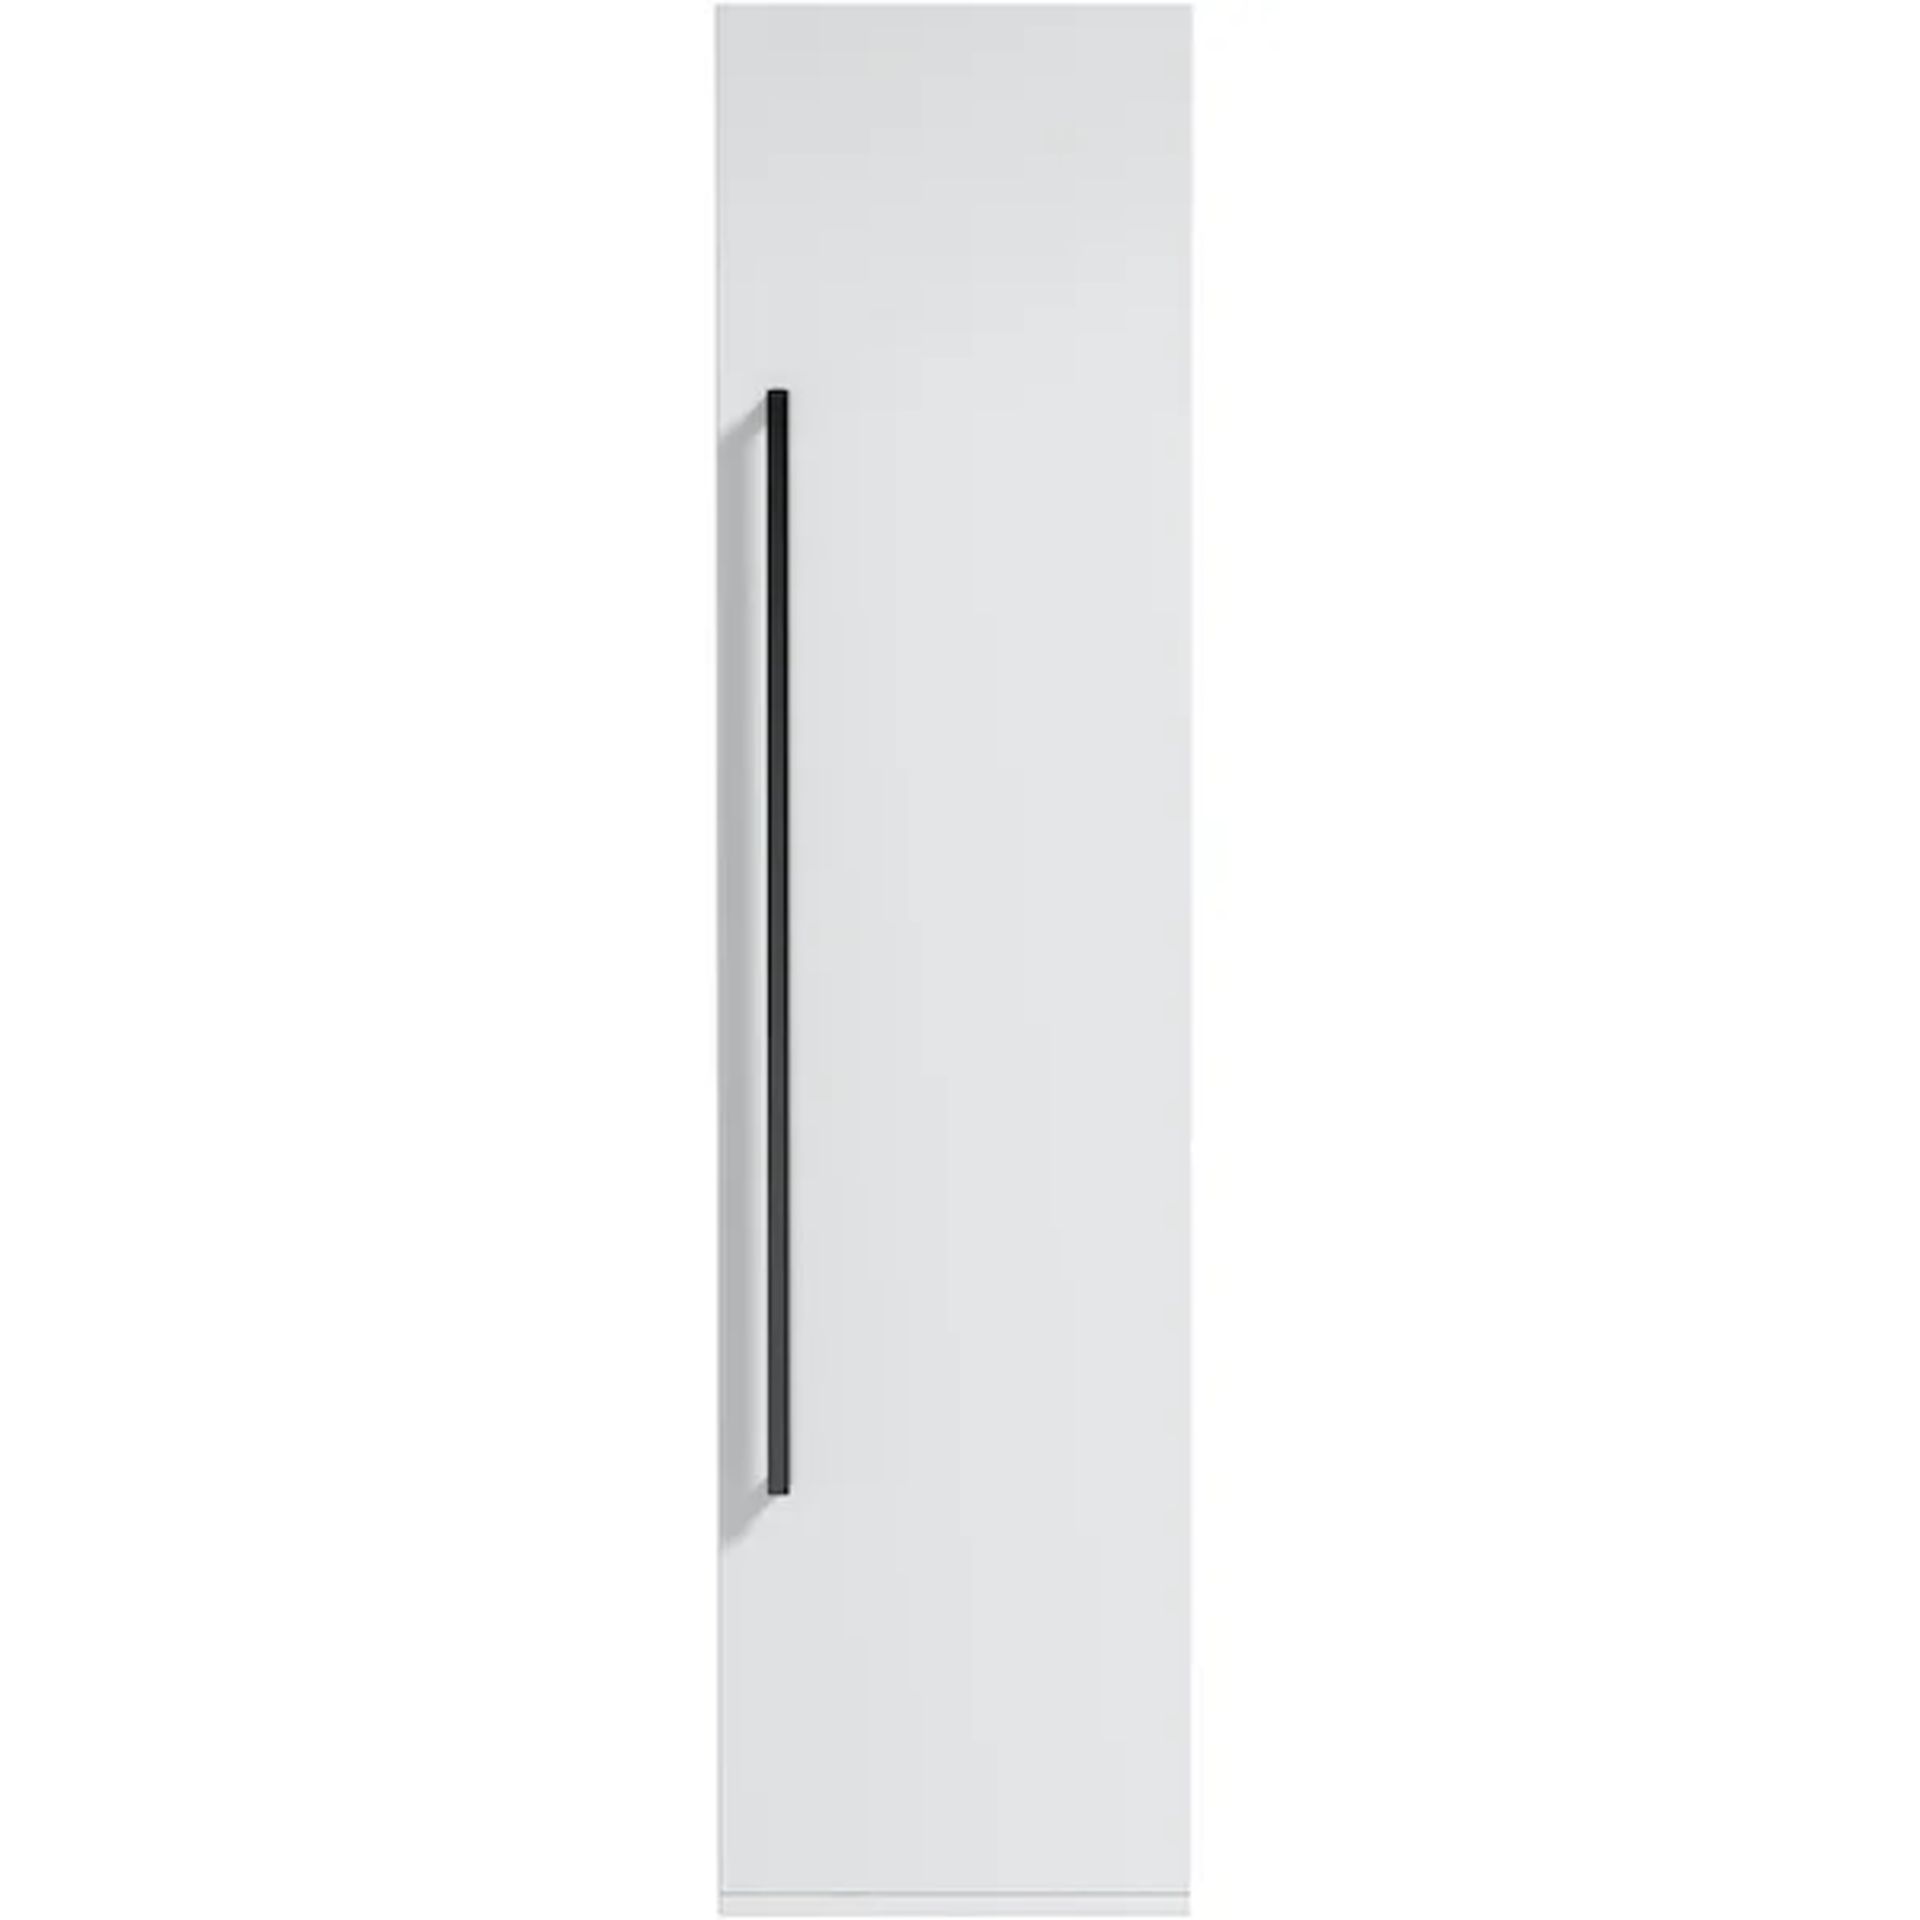 Derwent White Tall Wall Hung Cabinet Bathroom Cabinet - Image 2 of 6